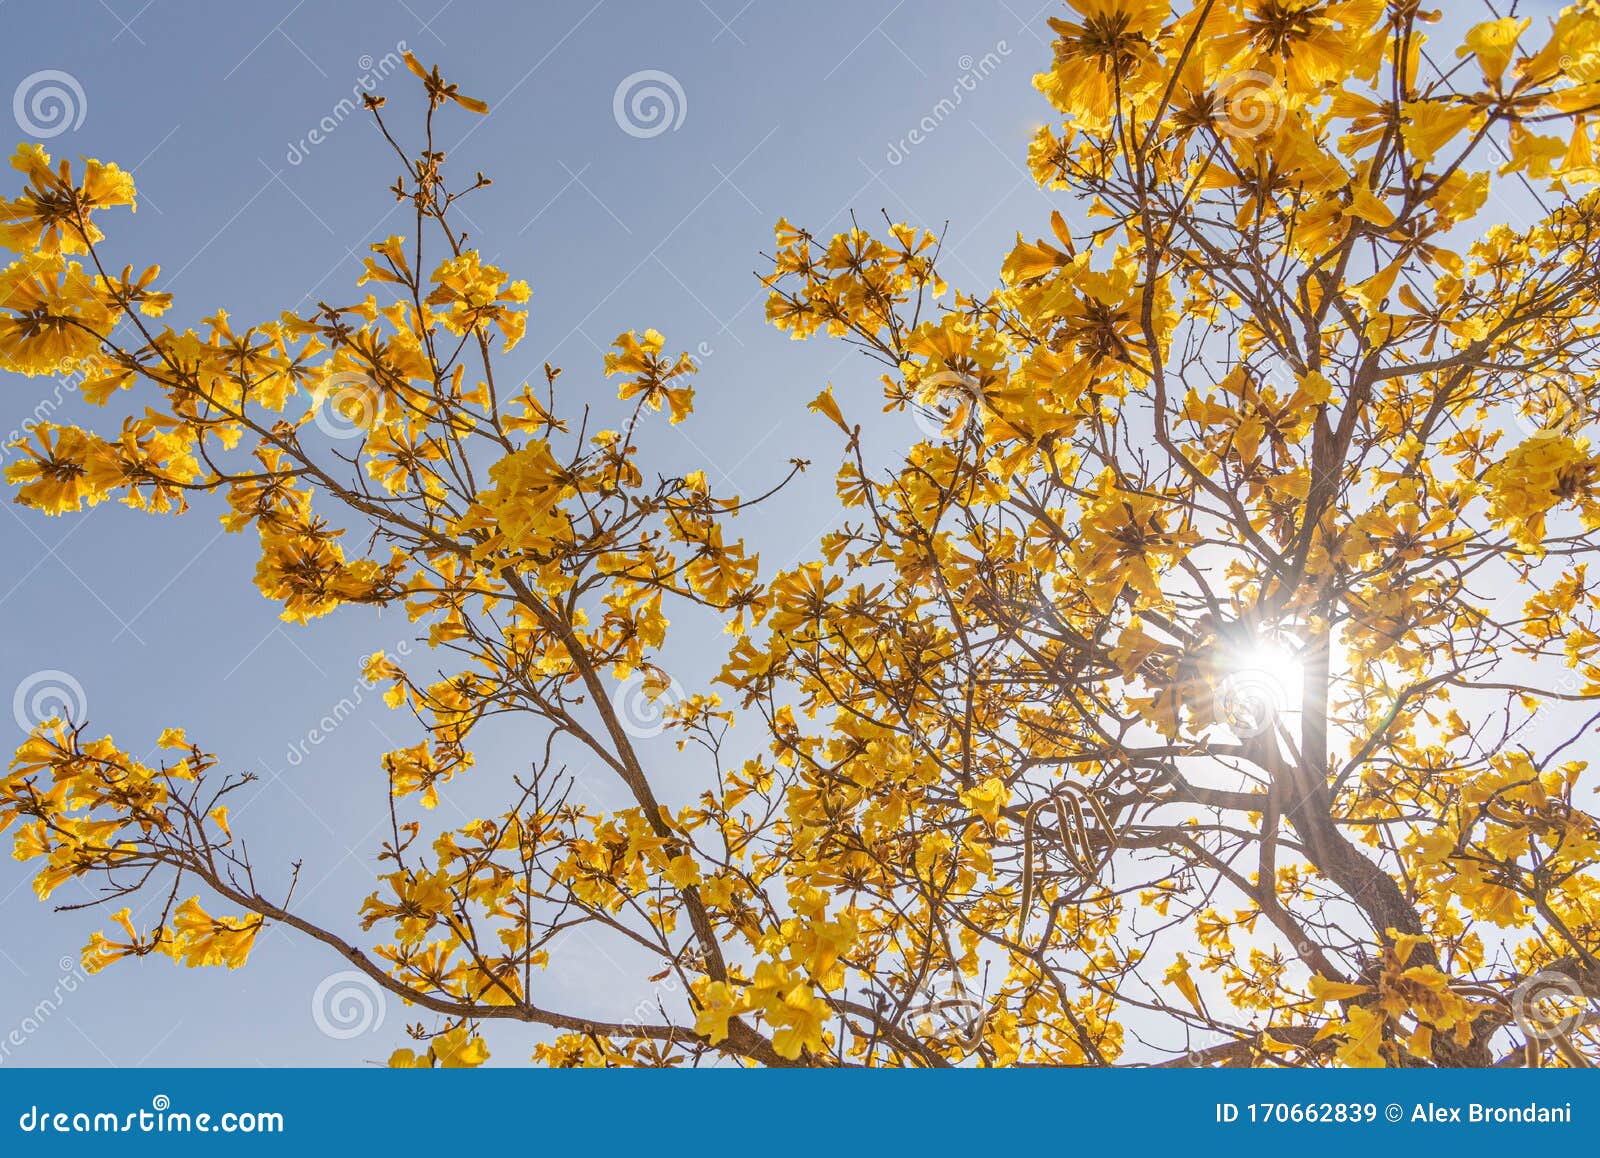 the flowers of the tree tabebuia vellosoi 04